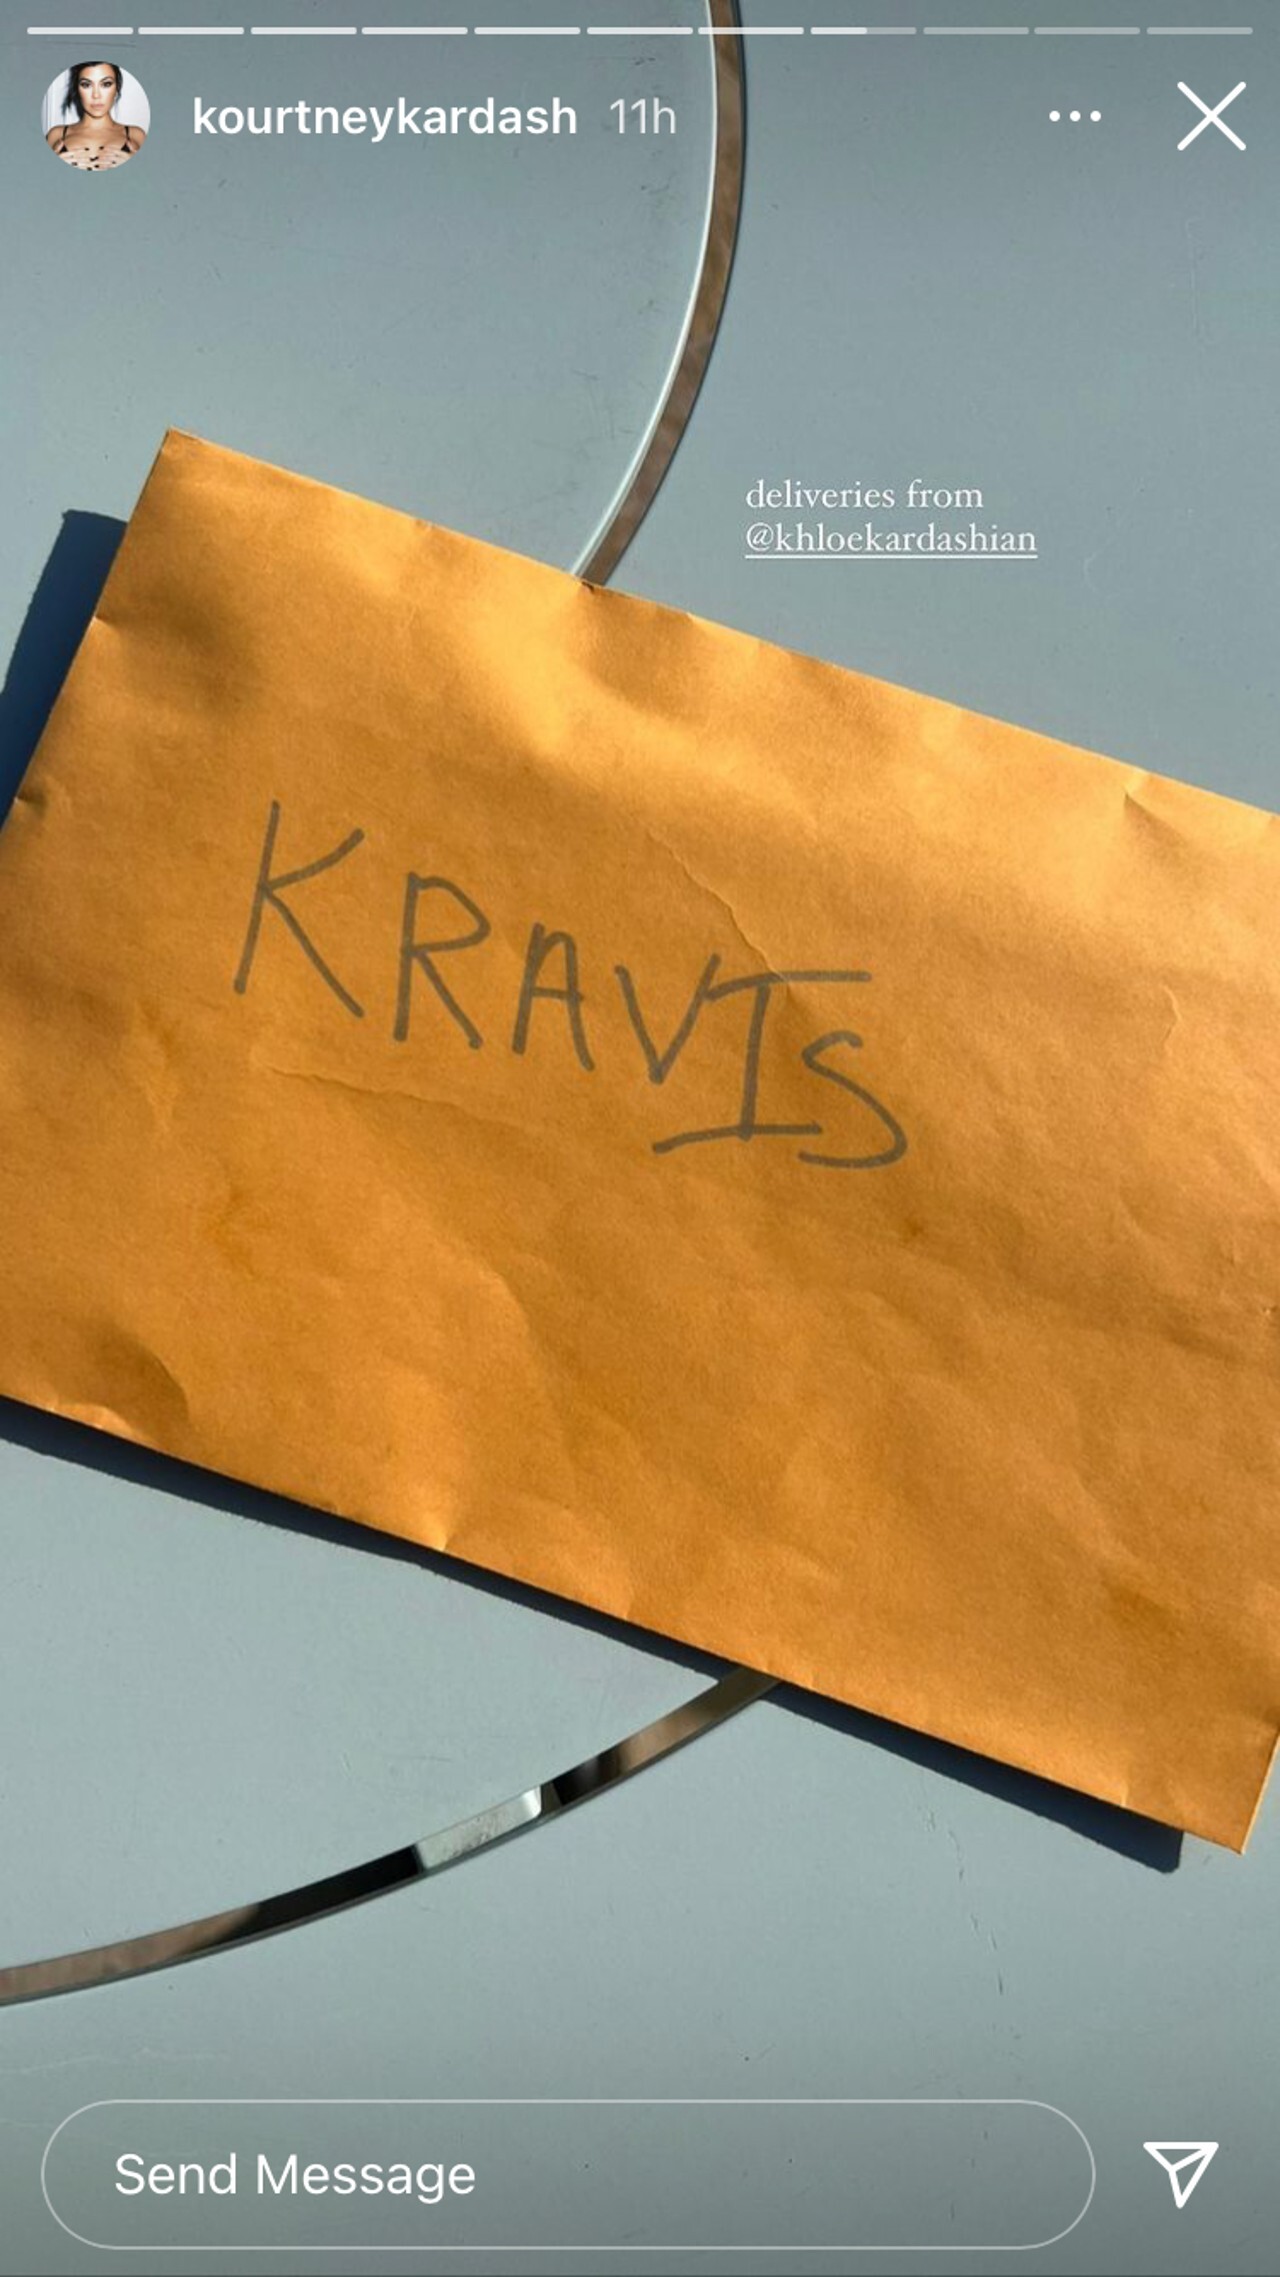 Kourtney Kardashian shares a photo of a package labeled for Kravis in her Instagram Stories.